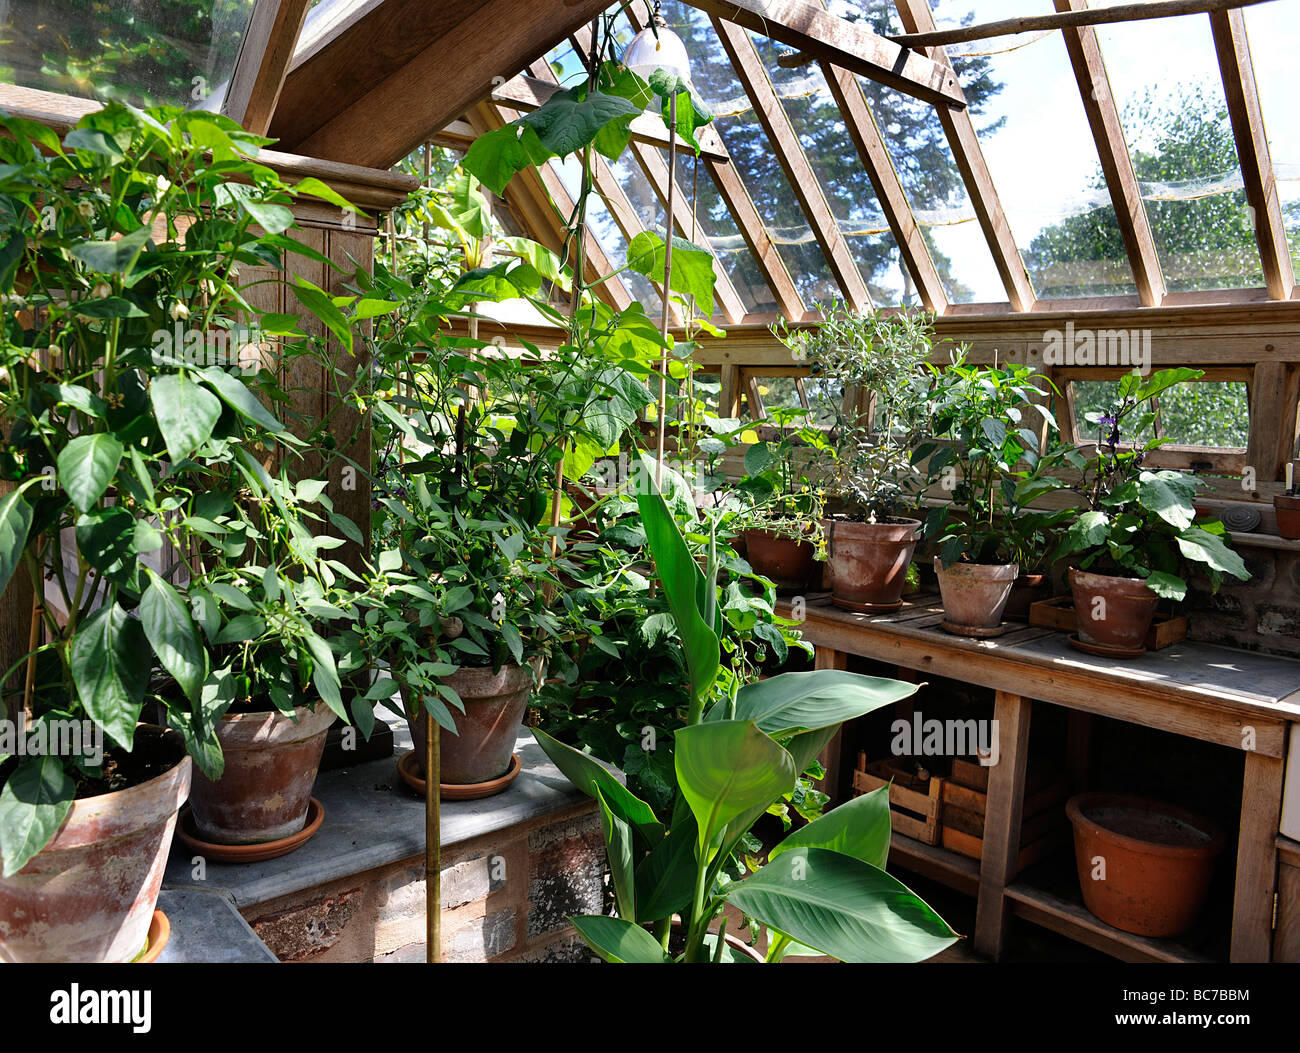 Greenhouse and plants in Holcombe Court, Devon, UK Stock Photo